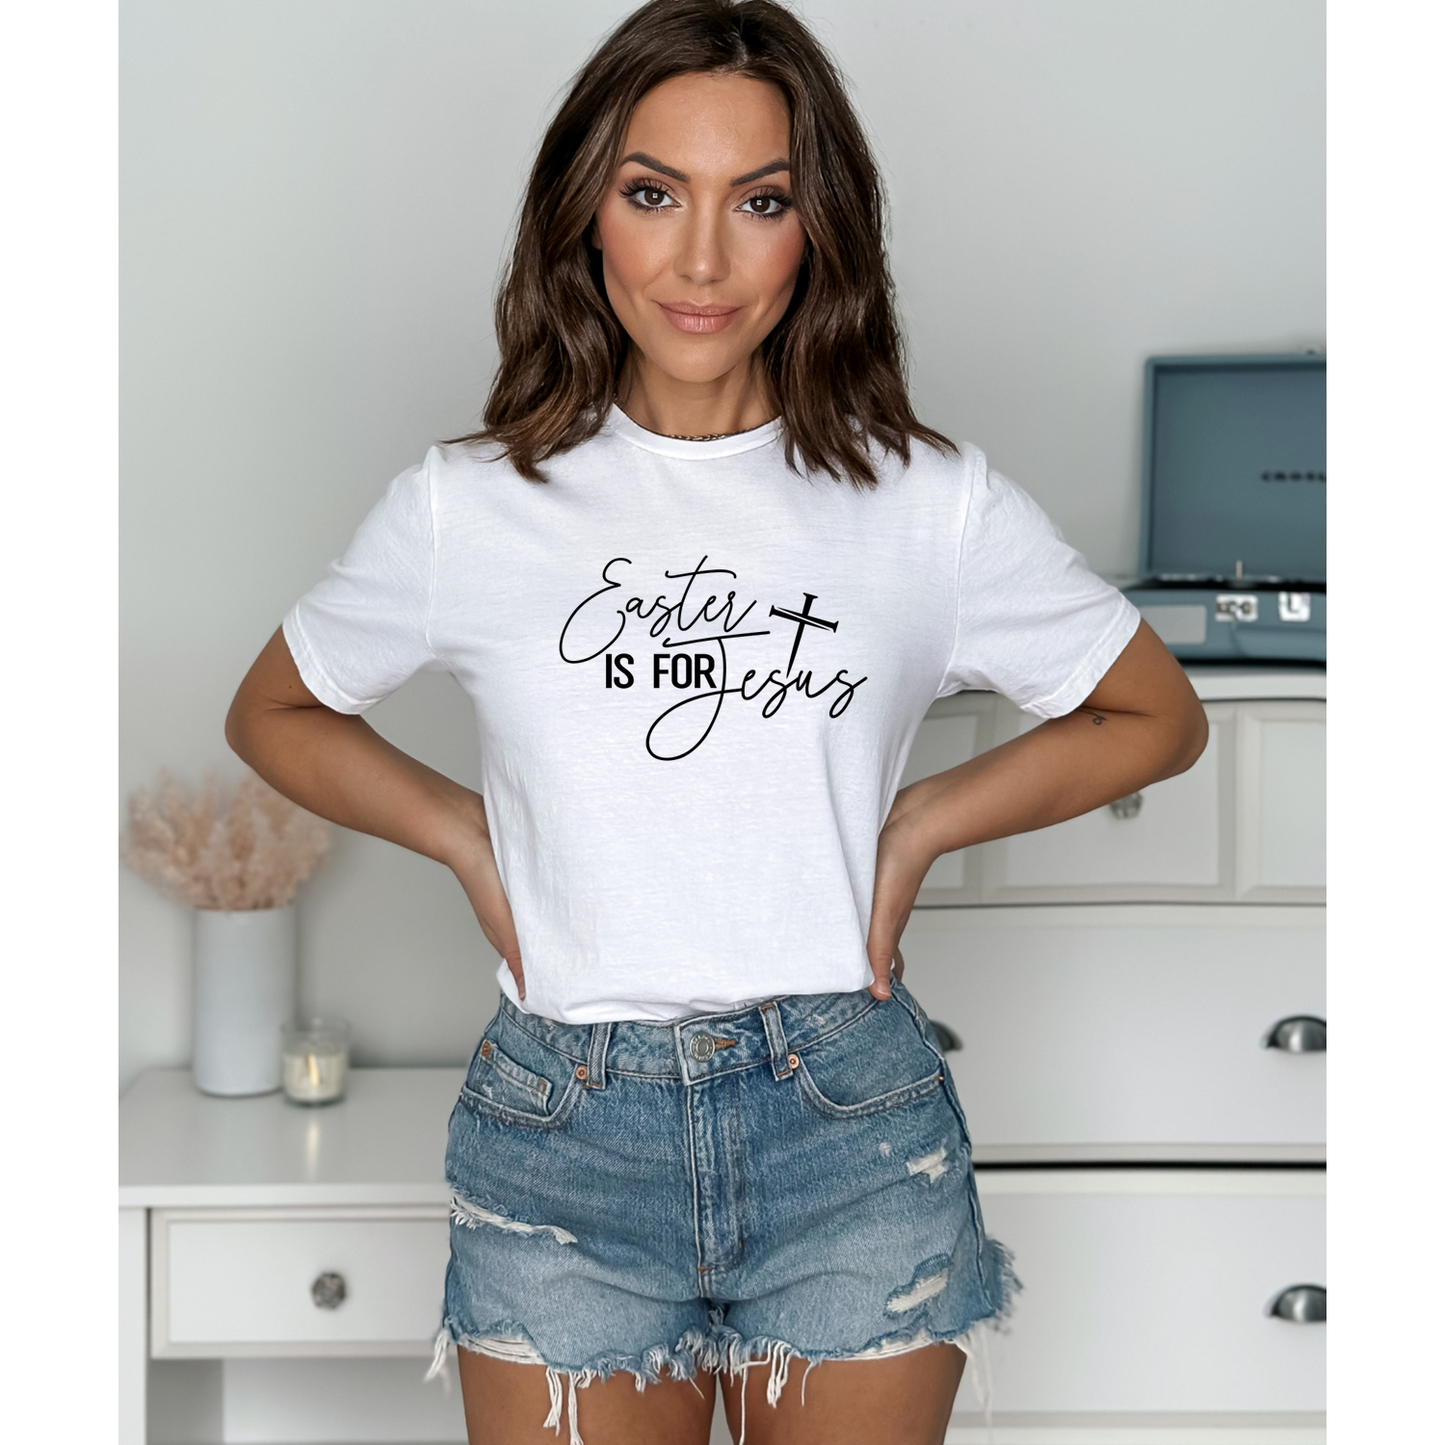 Easter is for Jesus - Adult Unisex Soft T-Shirt